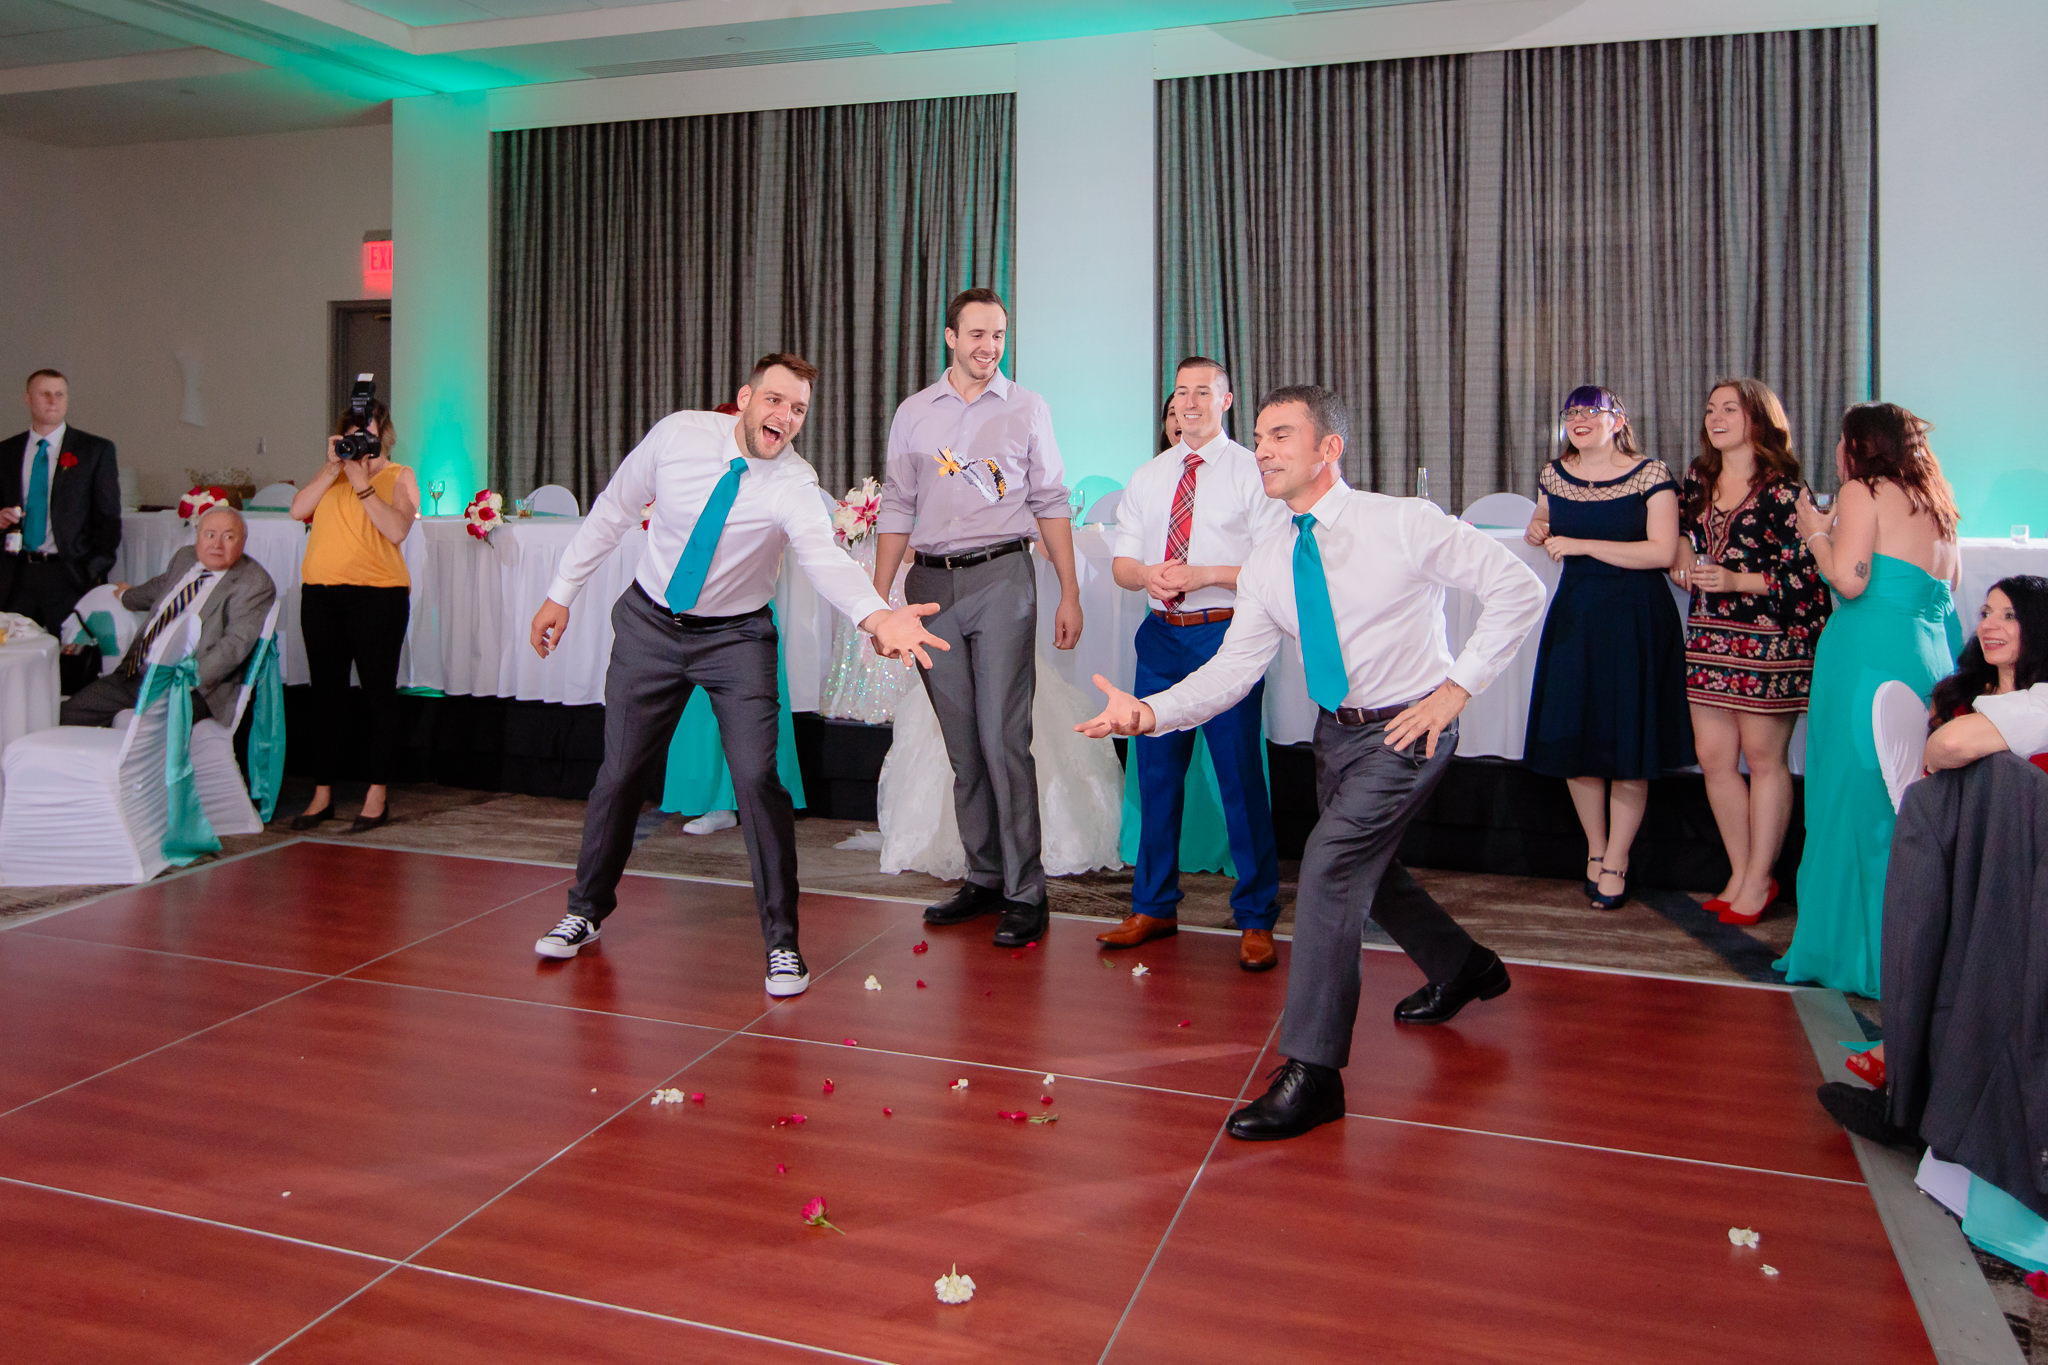 Single guys catch the garter at the Pittsburgh Airport Marriott